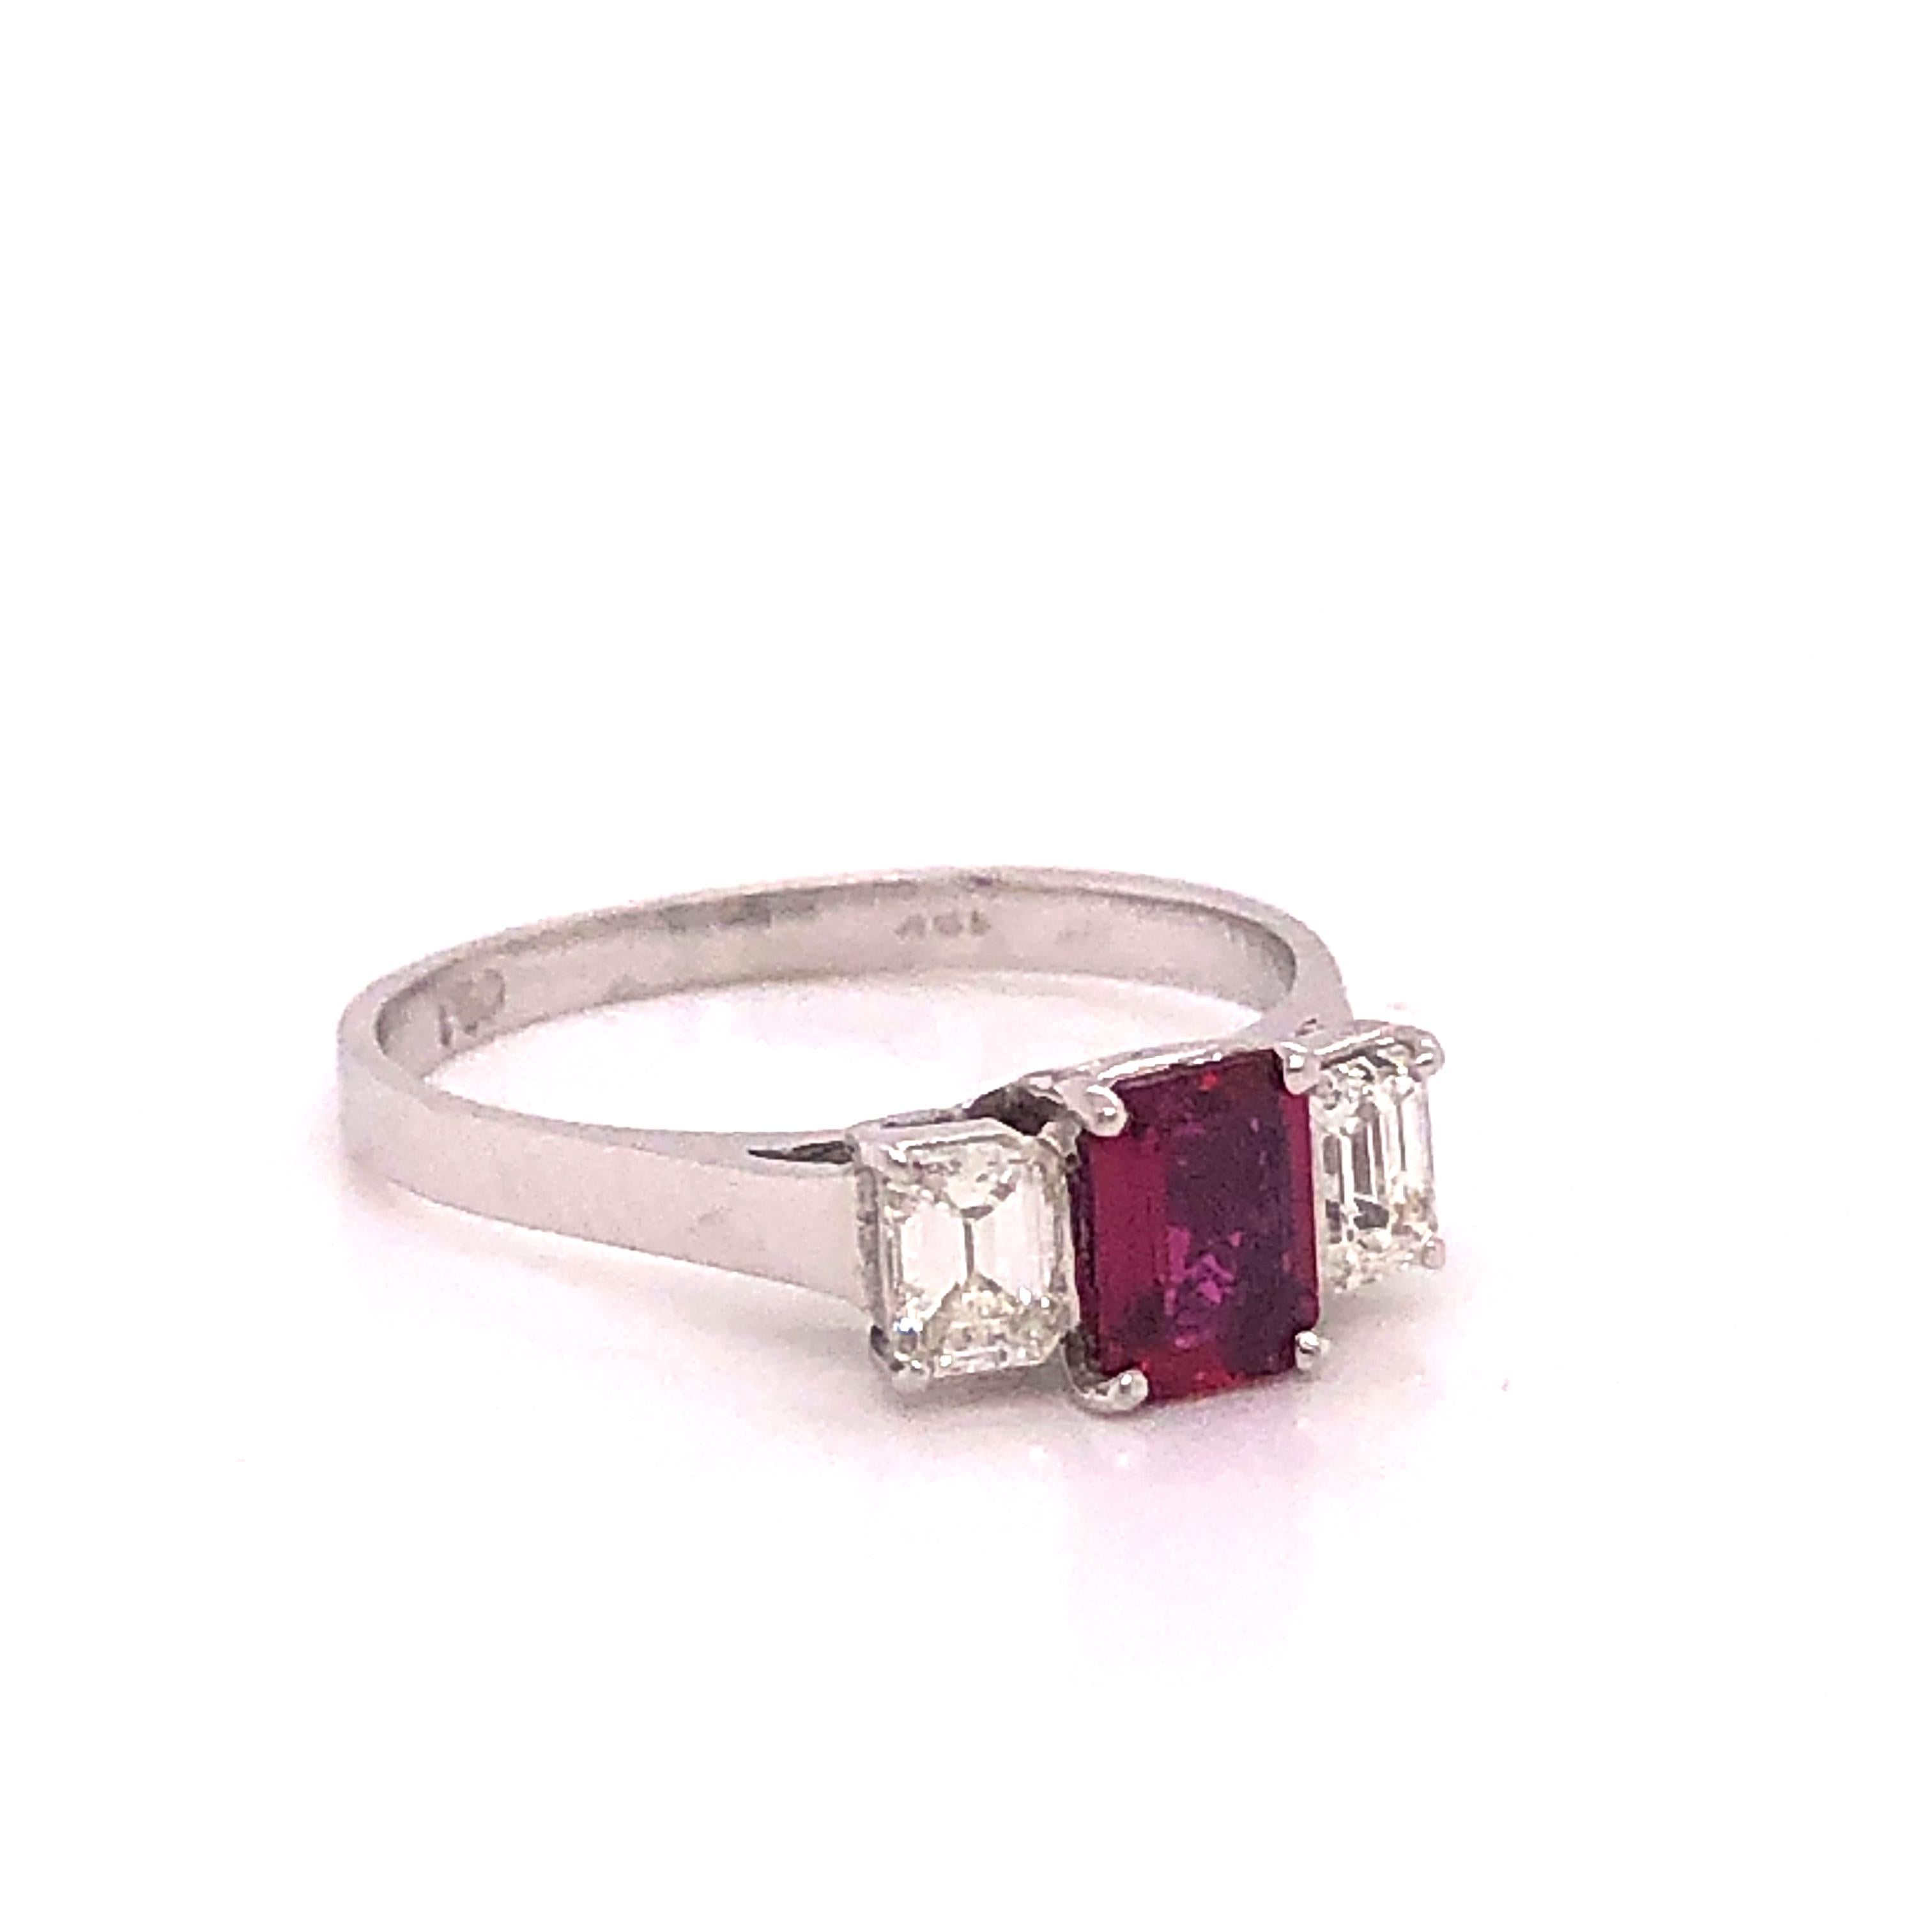 Amazing design on this simple yet majestic beauty. This ring is hand crafted out of 18k white gold.  This three stone design is highlighted with a center Ruby gemstone. The gemstone shows a lushious red color and is a emerald cut gemstone. The Ruby